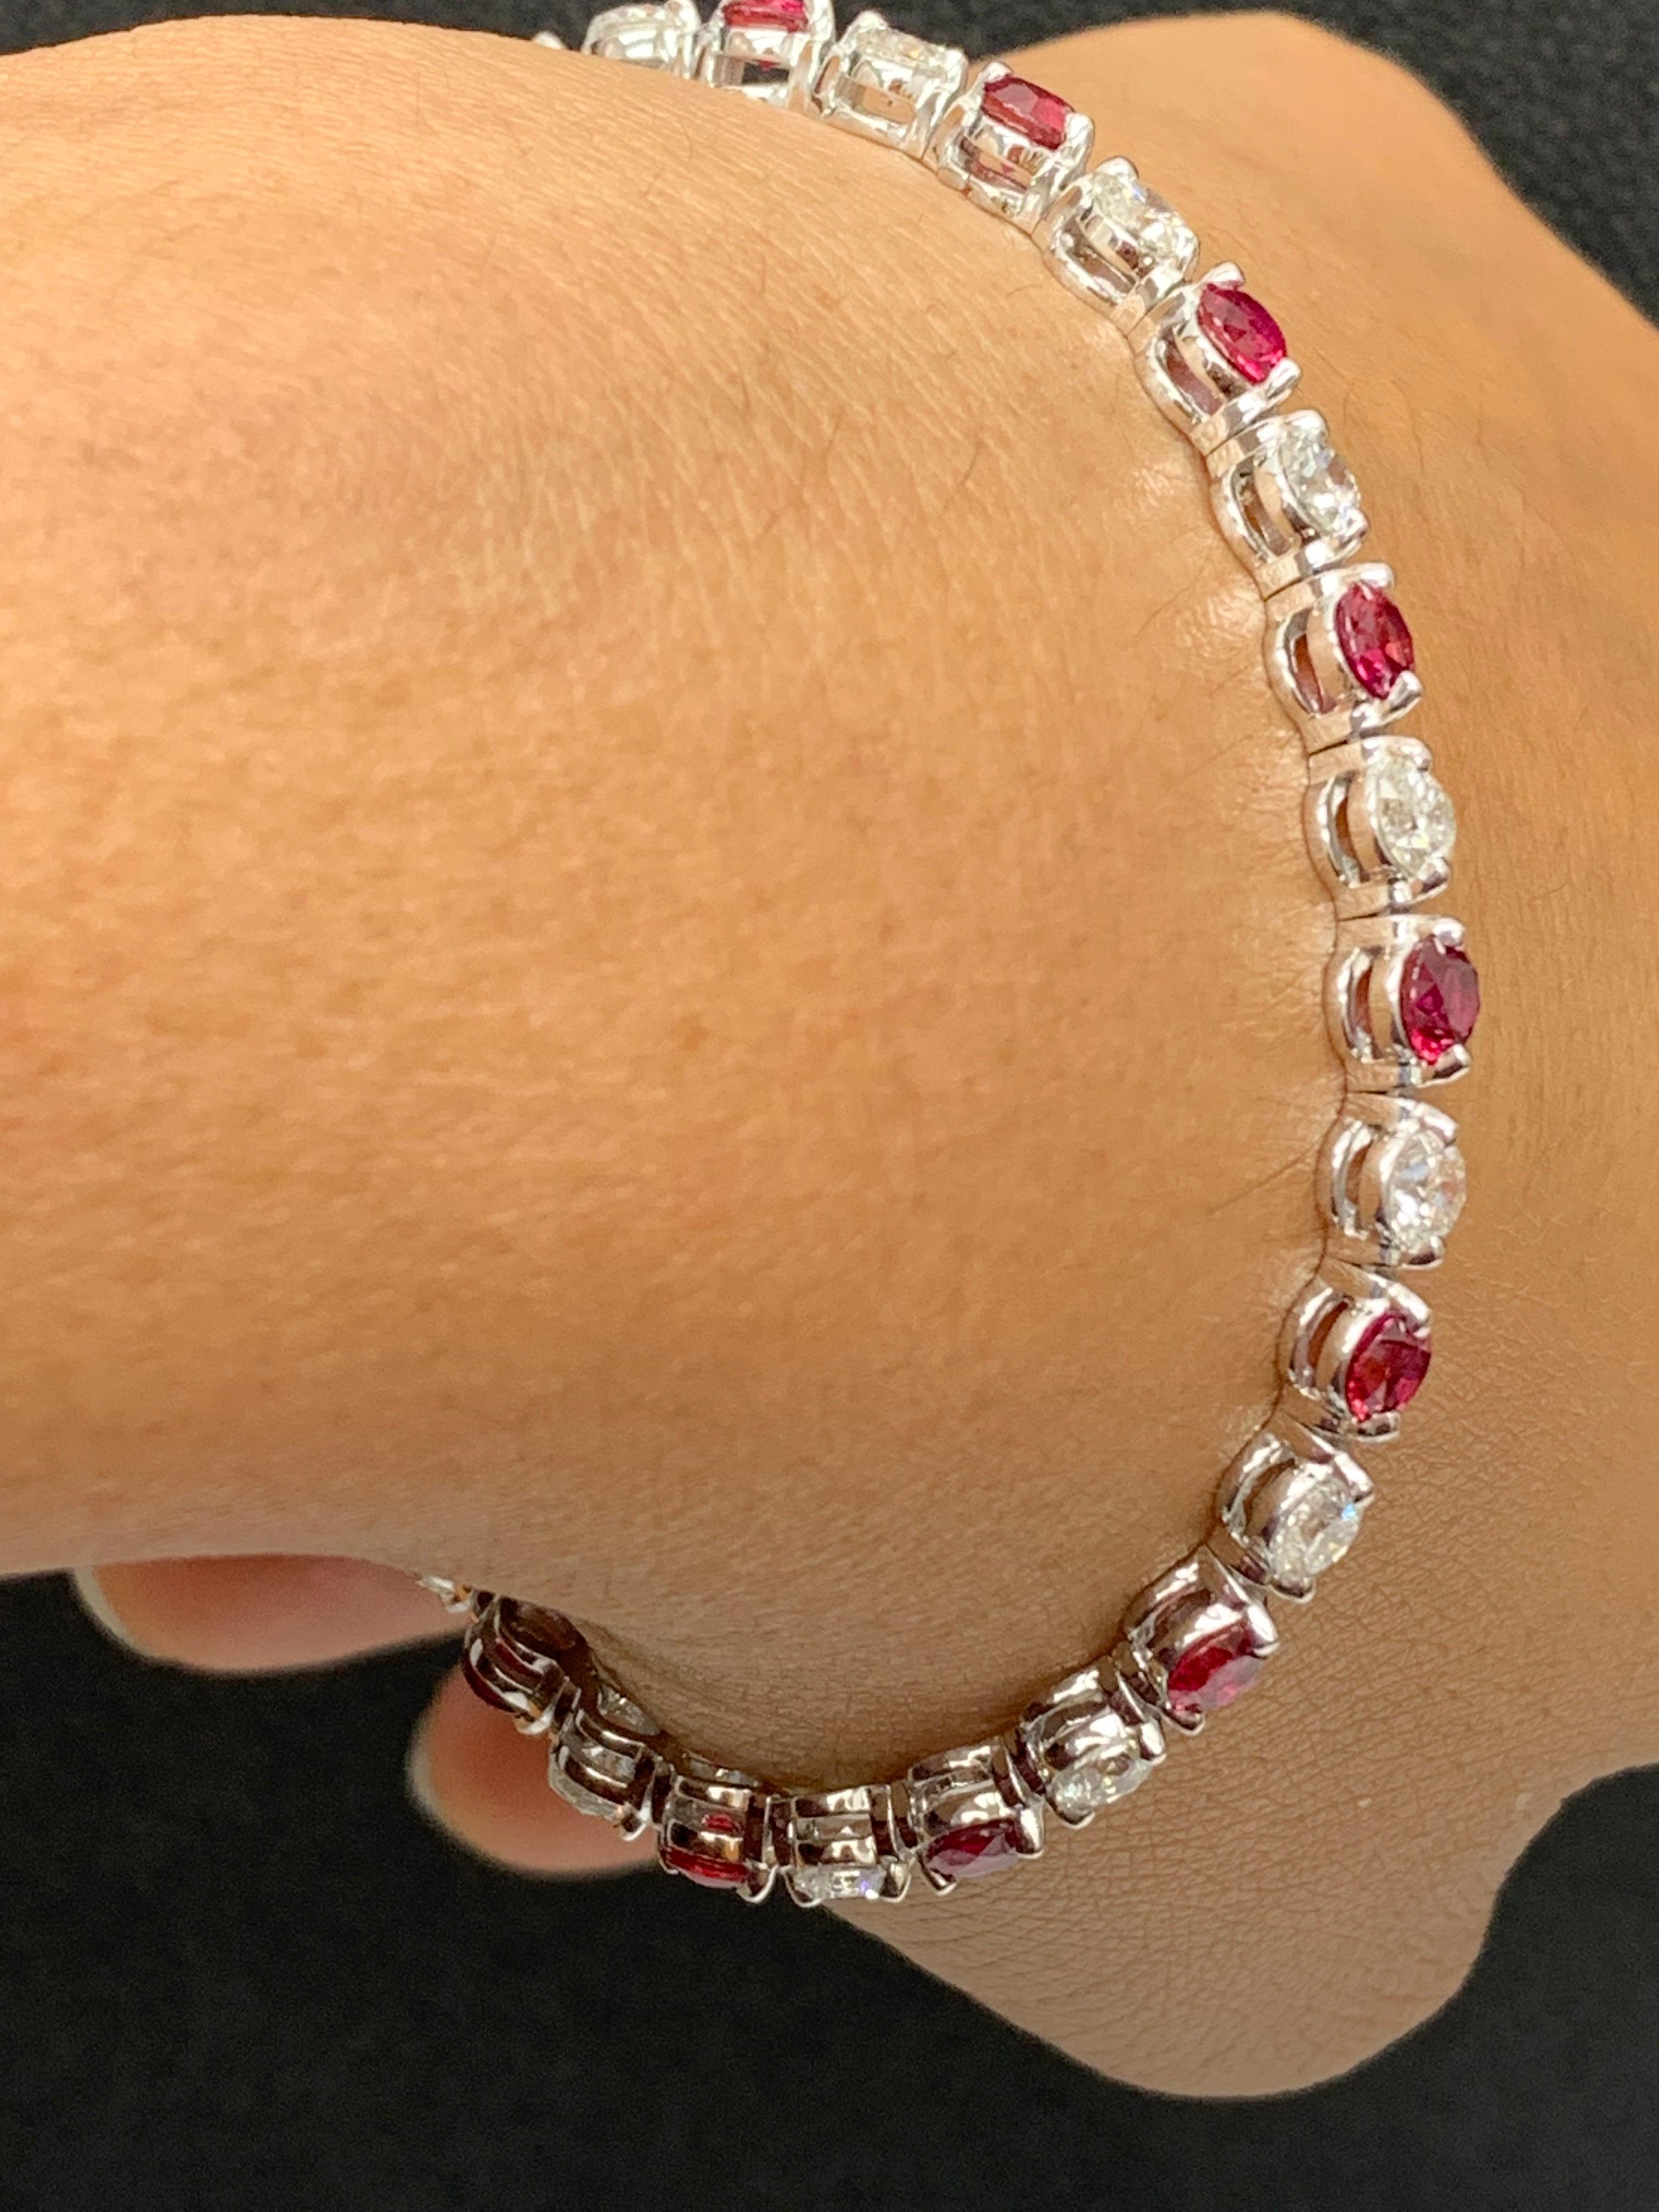 4.55 Carat Round Ruby and Diamond Bracelet in 14k White Gold For Sale 3